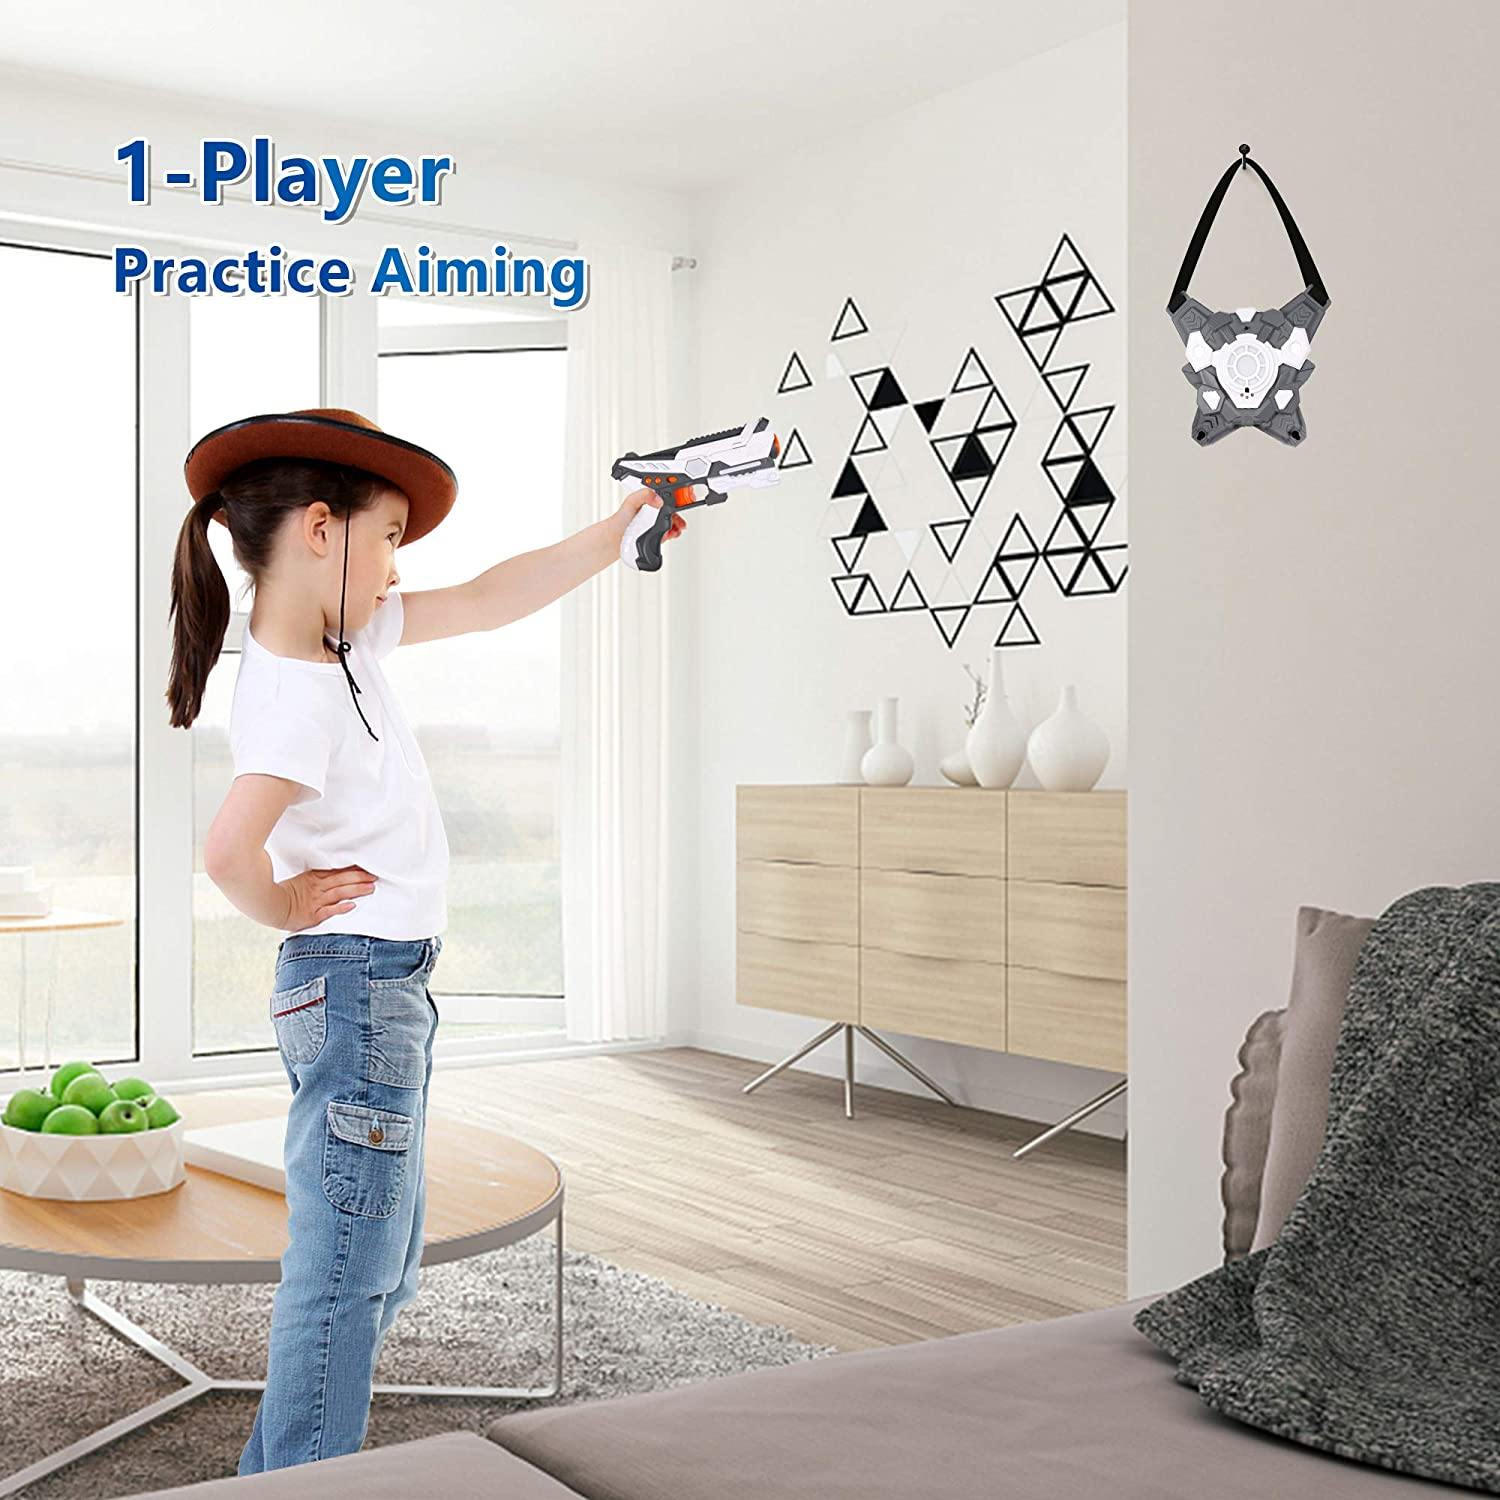 Kids Toys Gun with Vest for Boys Girls Target Shooting Game Toy, Indoor Outdoor Practice Aiming for 1-Player +, Grey - Bosonshop